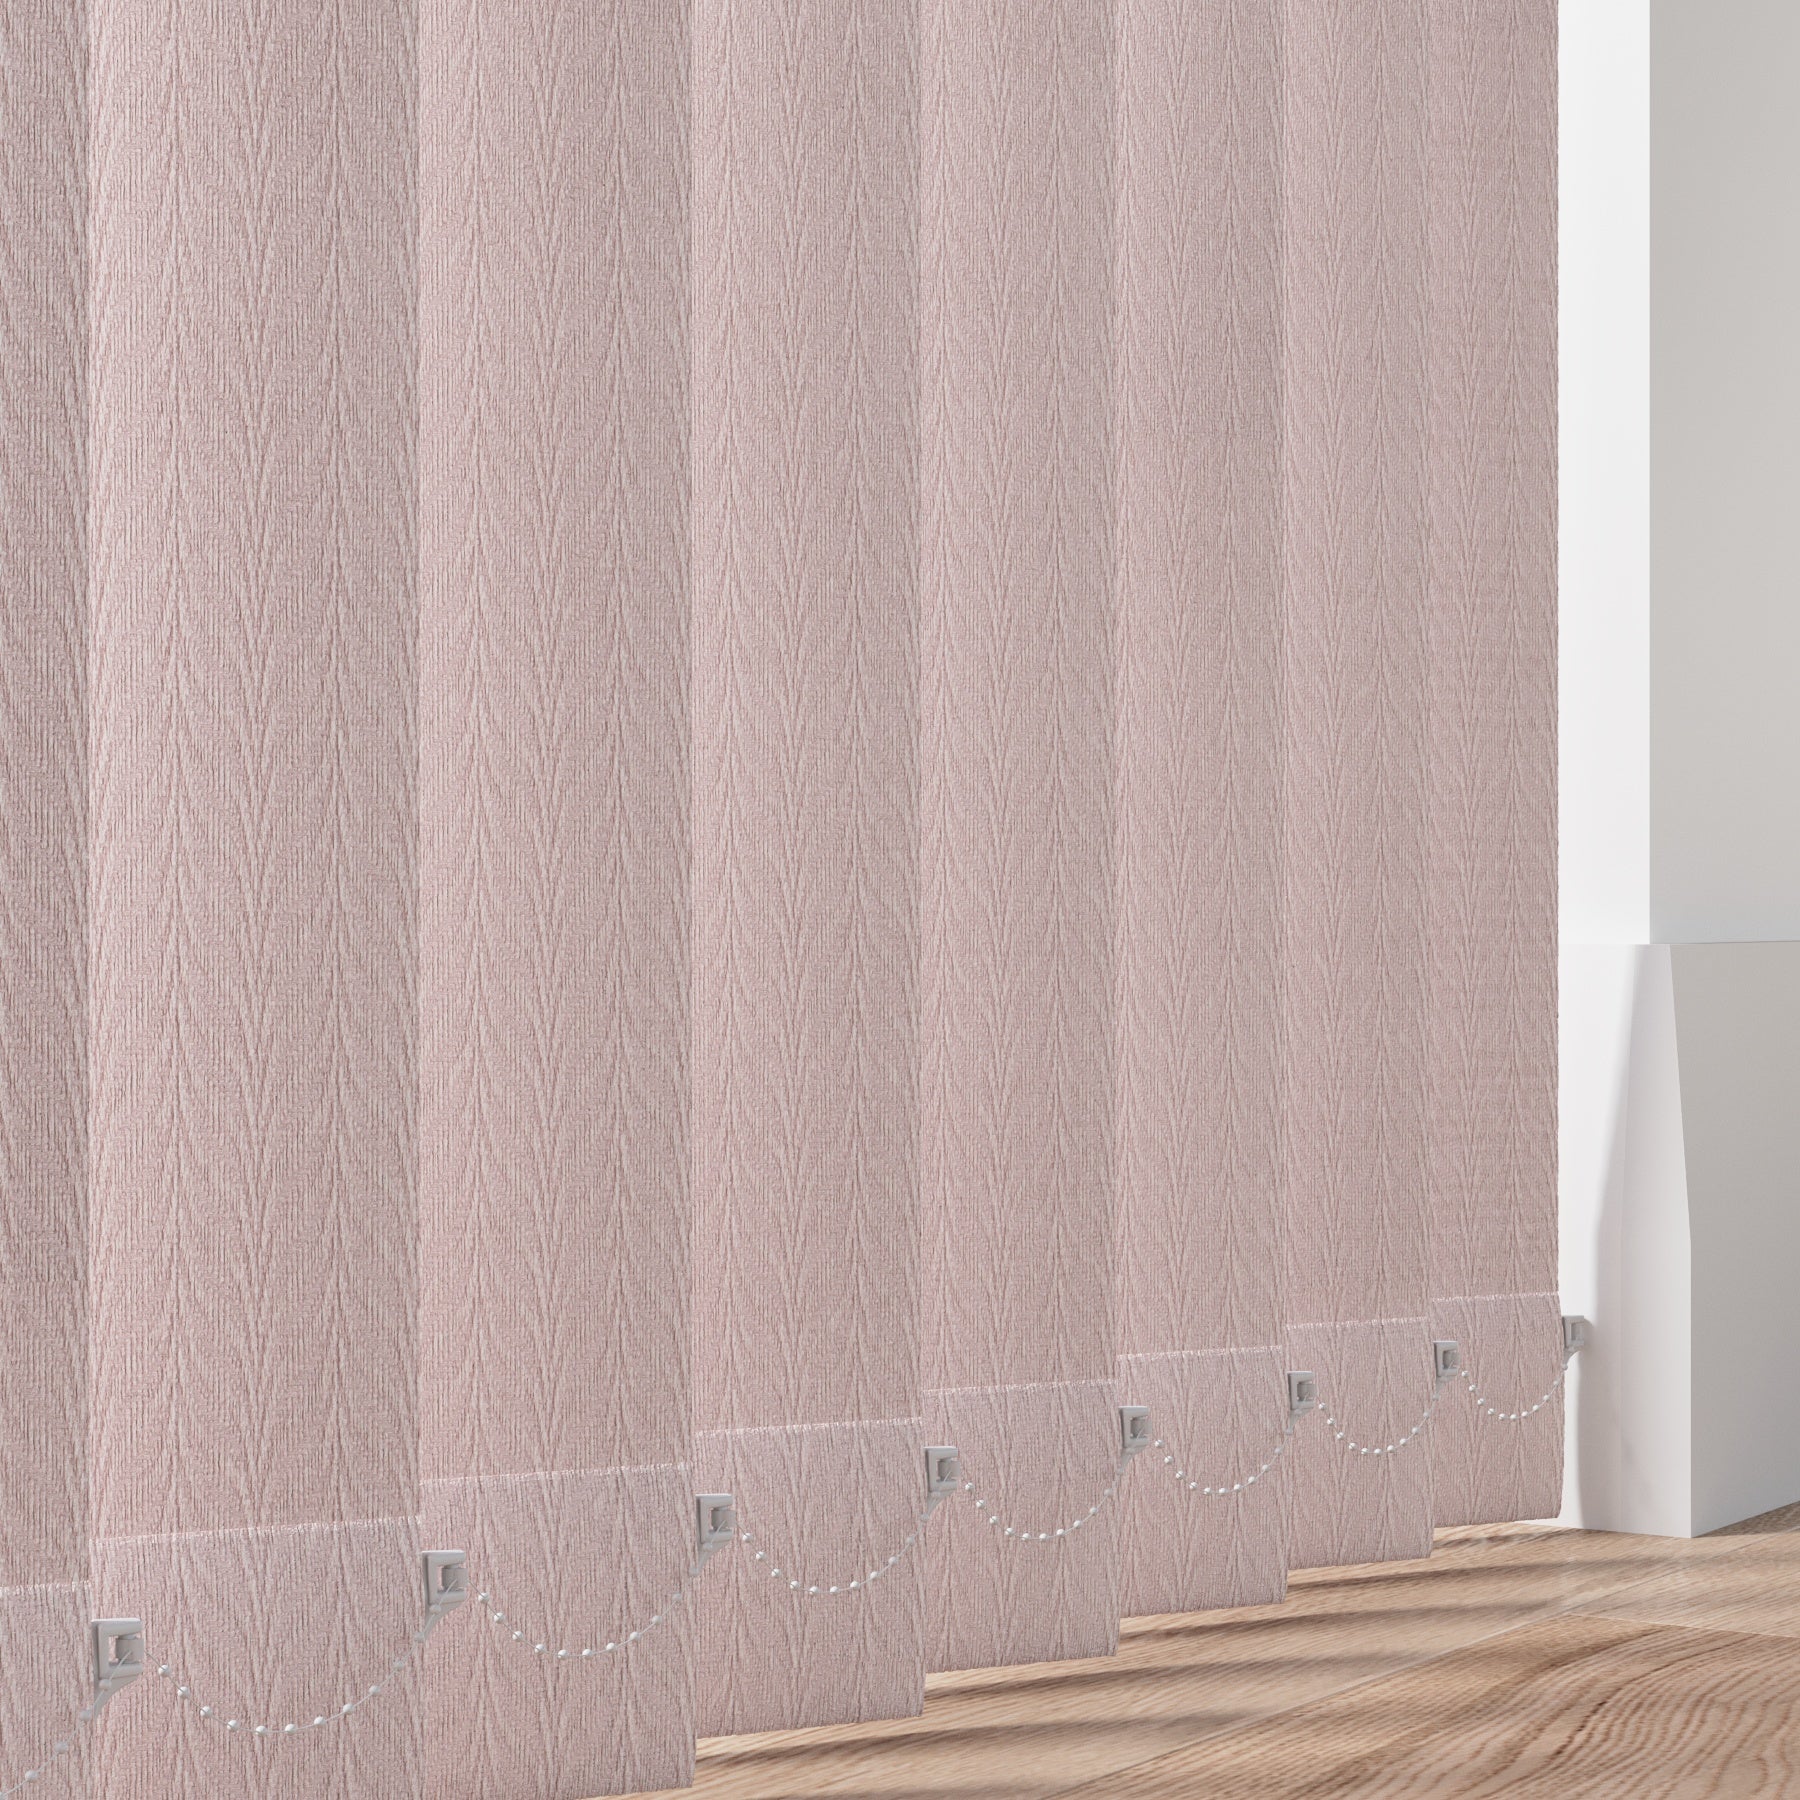 Feather Weave Chantilly - Pink Vertical Blinds